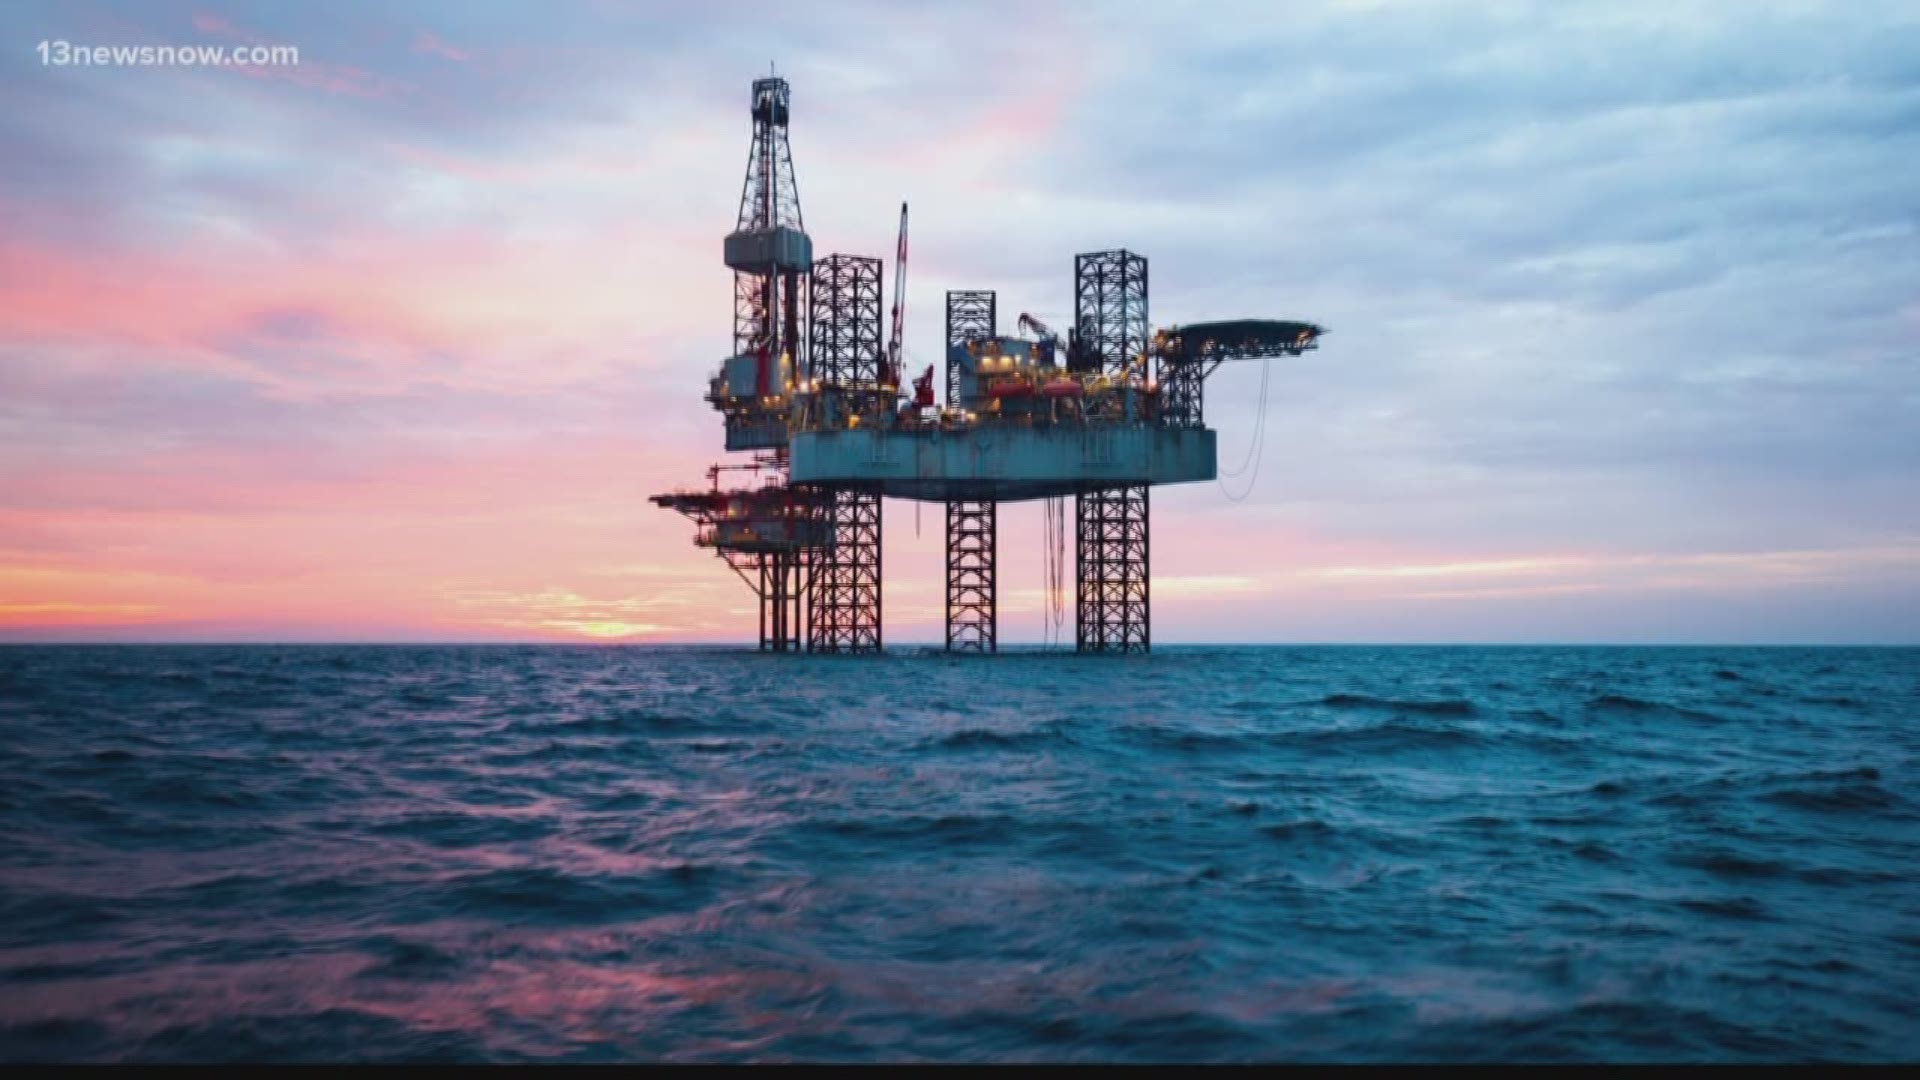 The topic offshore drilling continues to fuel a lot of debate.